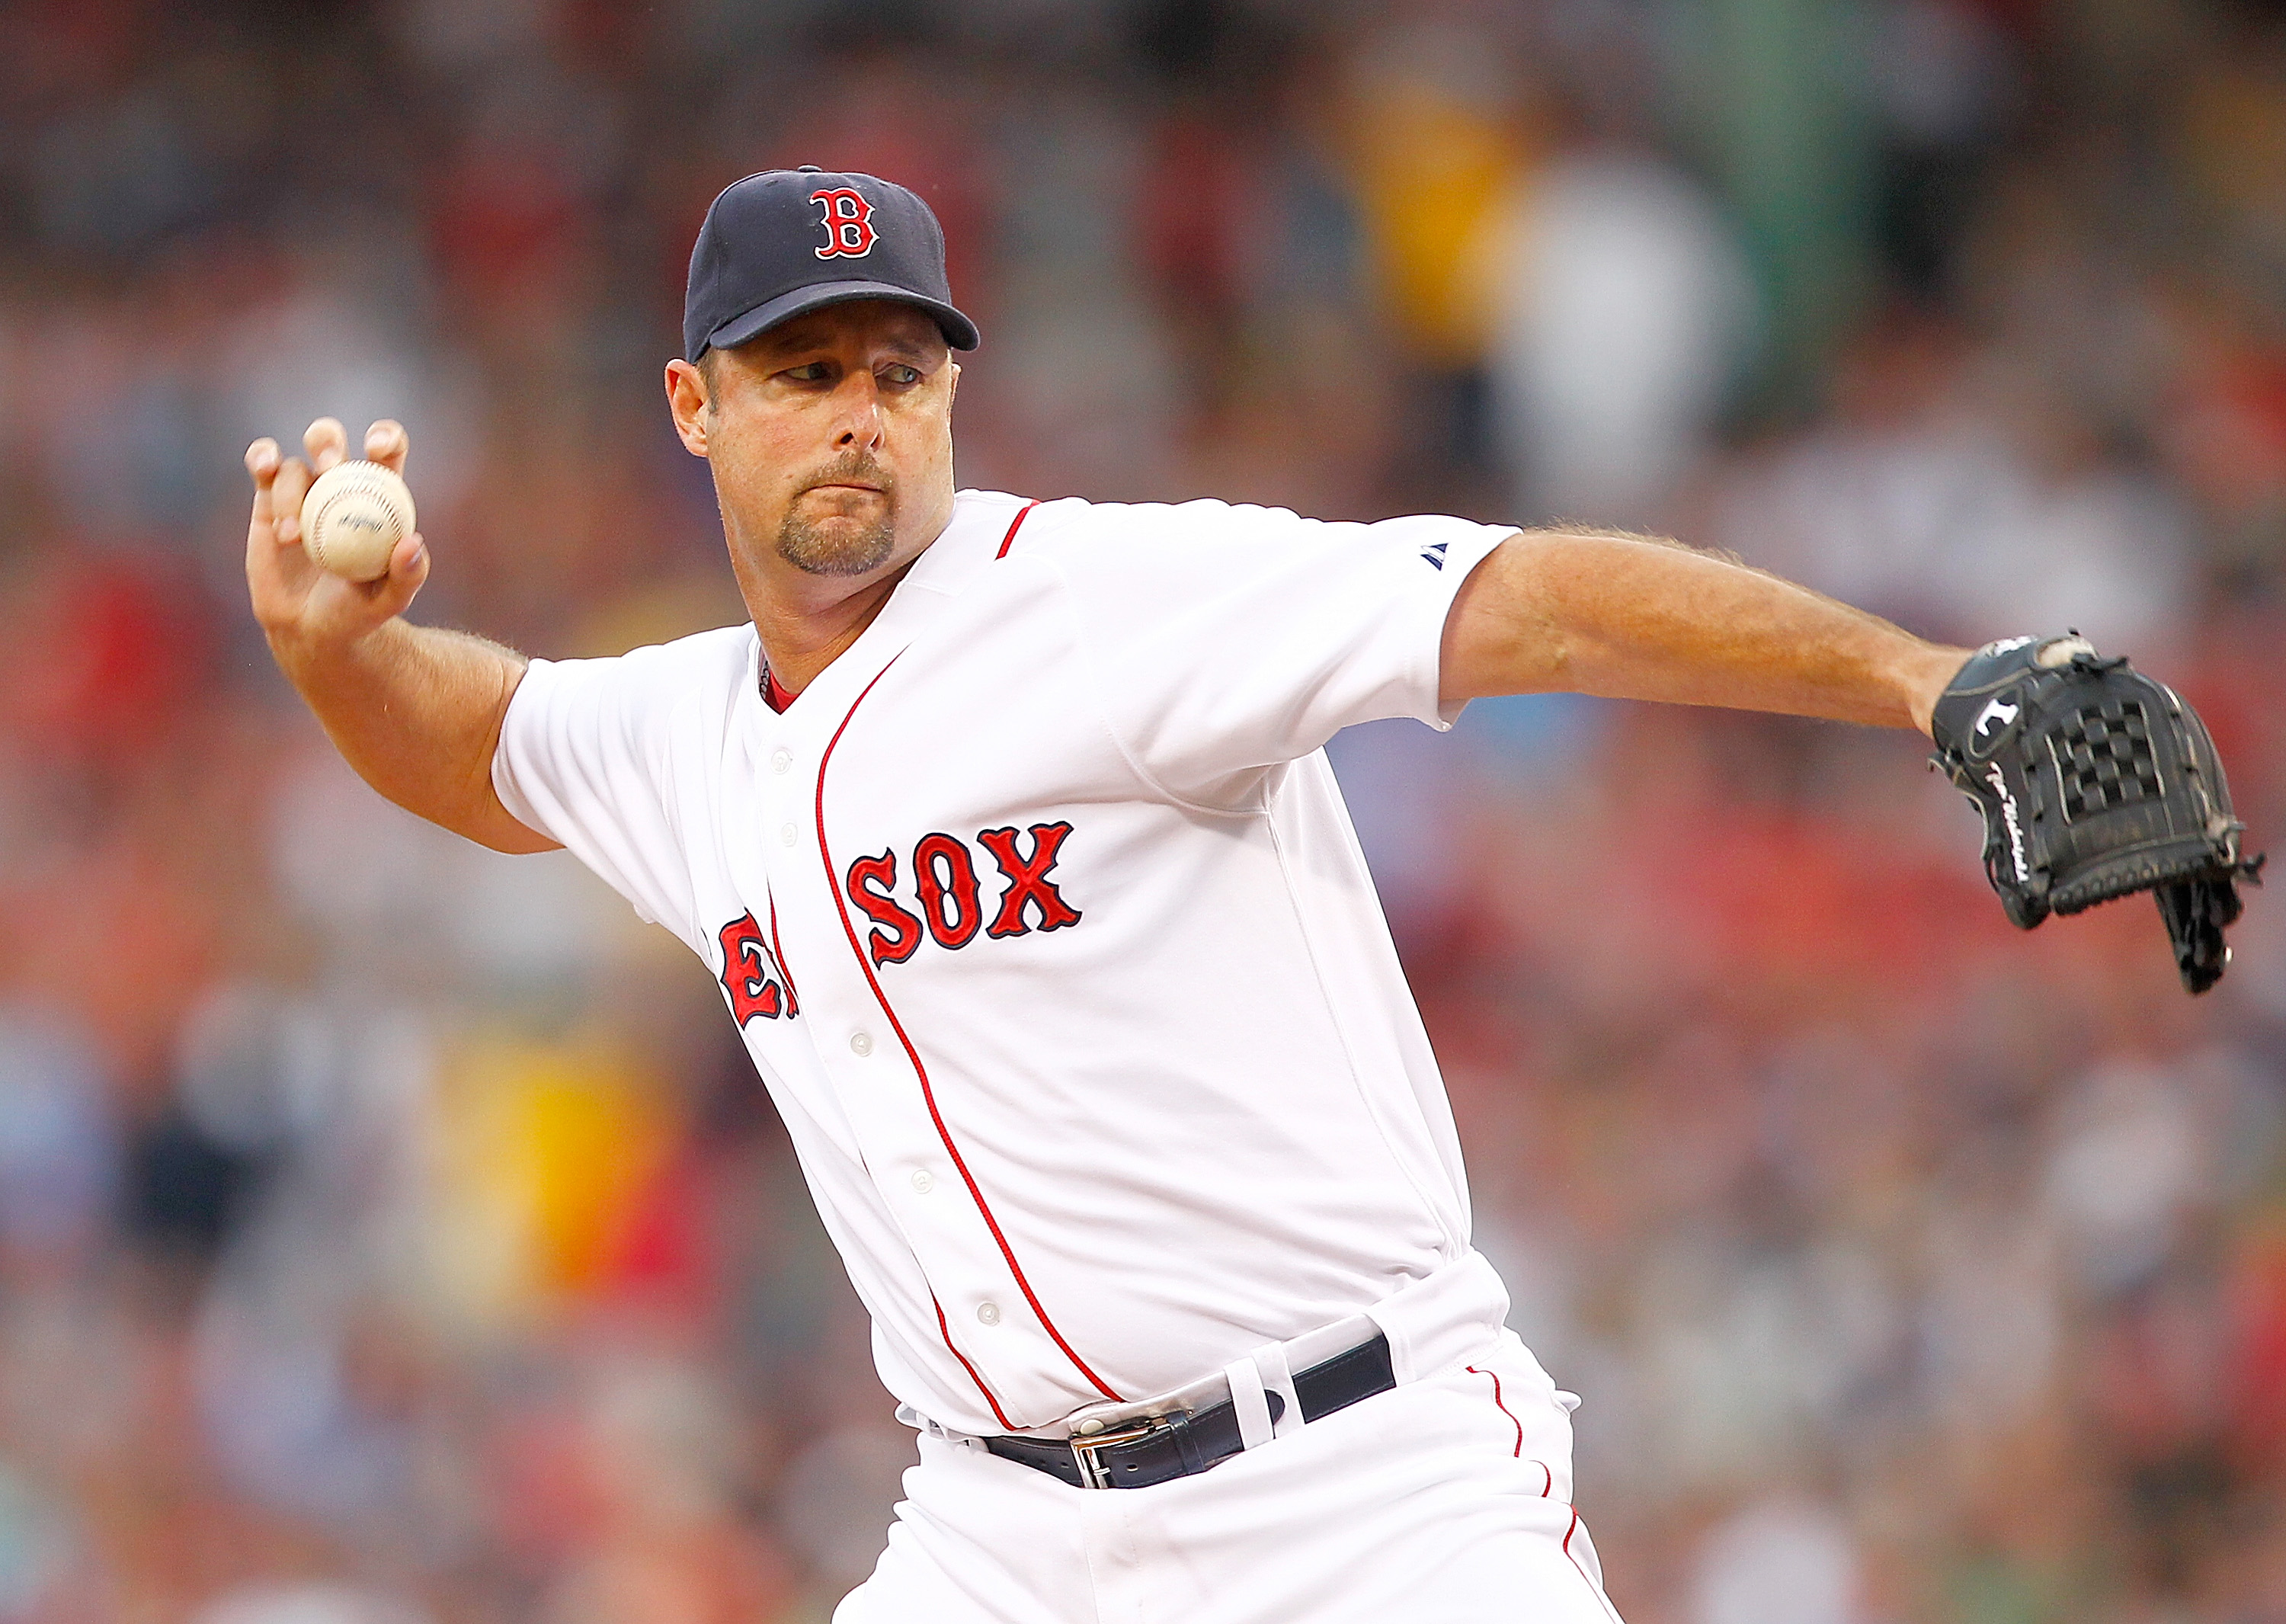 Red Sox release statement on health battle of beloved pitcher Tim Wakefield  and asked for privacy – Boston 25 News